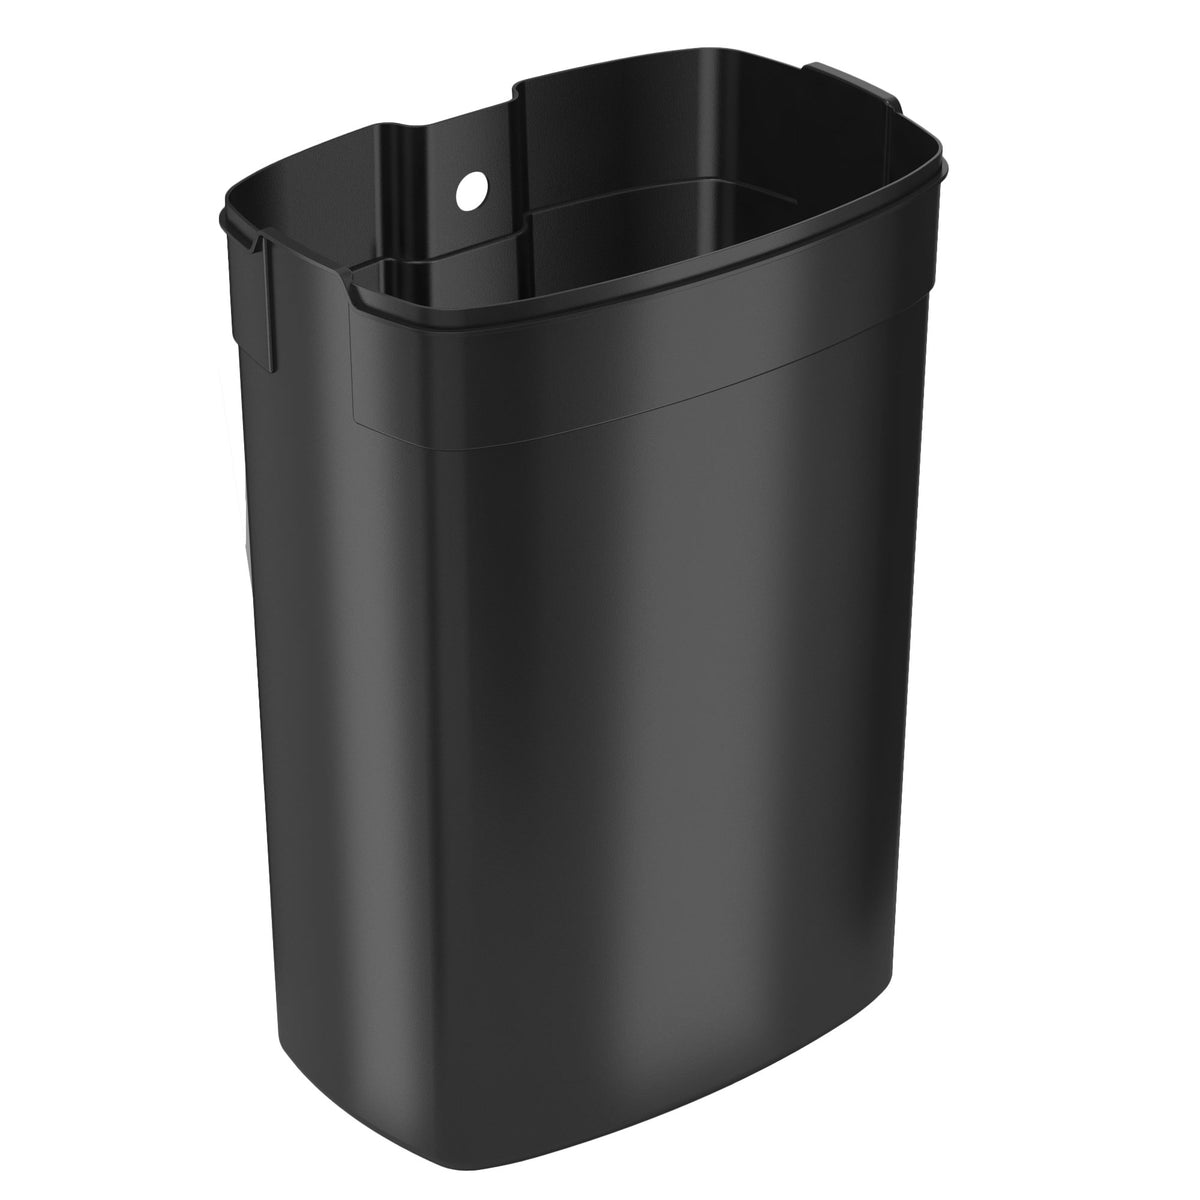 13 Gallon AirStep Step Pedal Trash Can – iTouchless Housewares and Products  Inc.